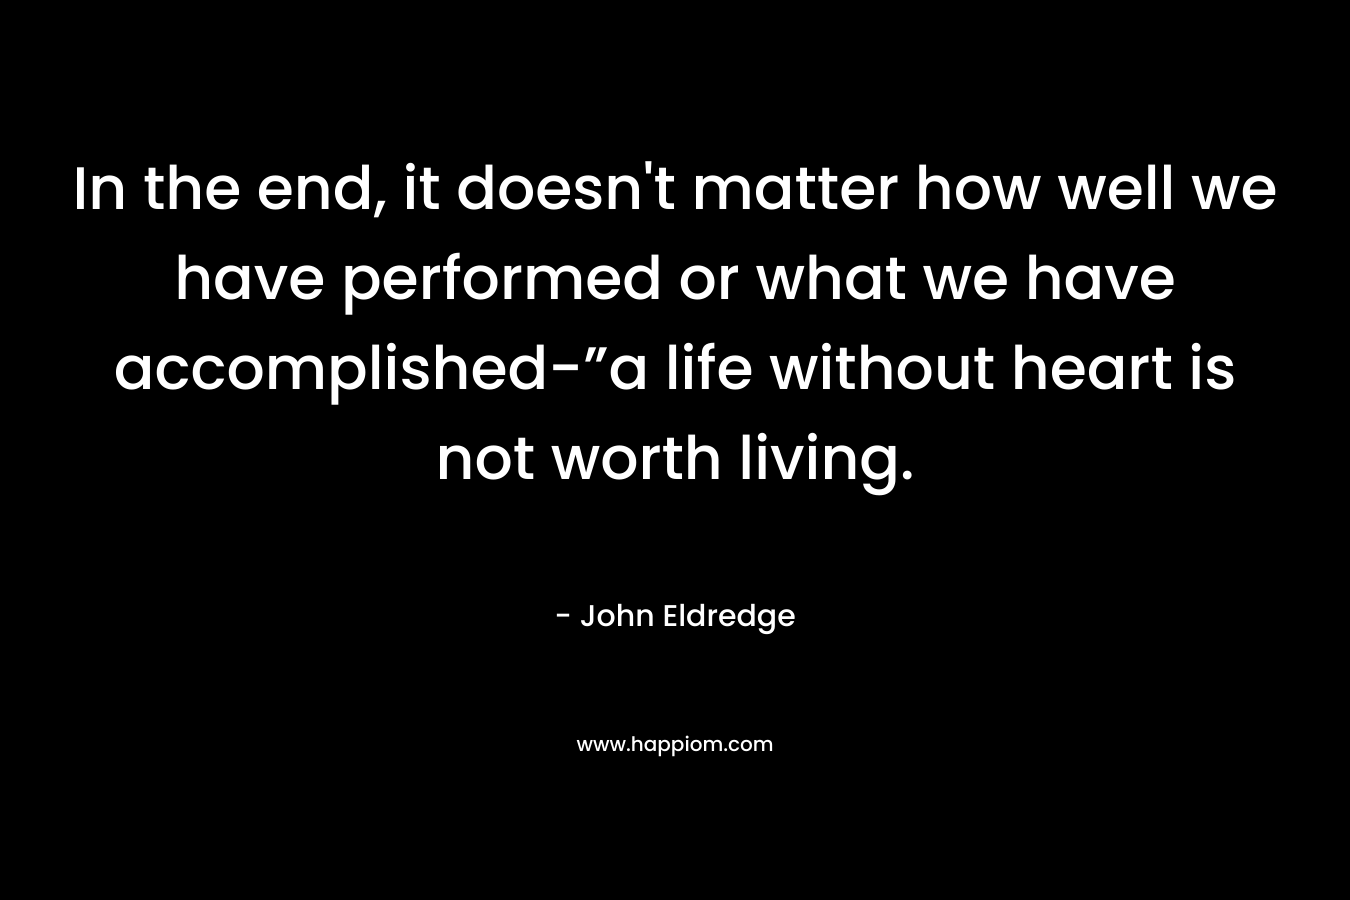 In the end, it doesn’t matter how well we have performed or what we have accomplished-”a life without heart is not worth living. – John Eldredge